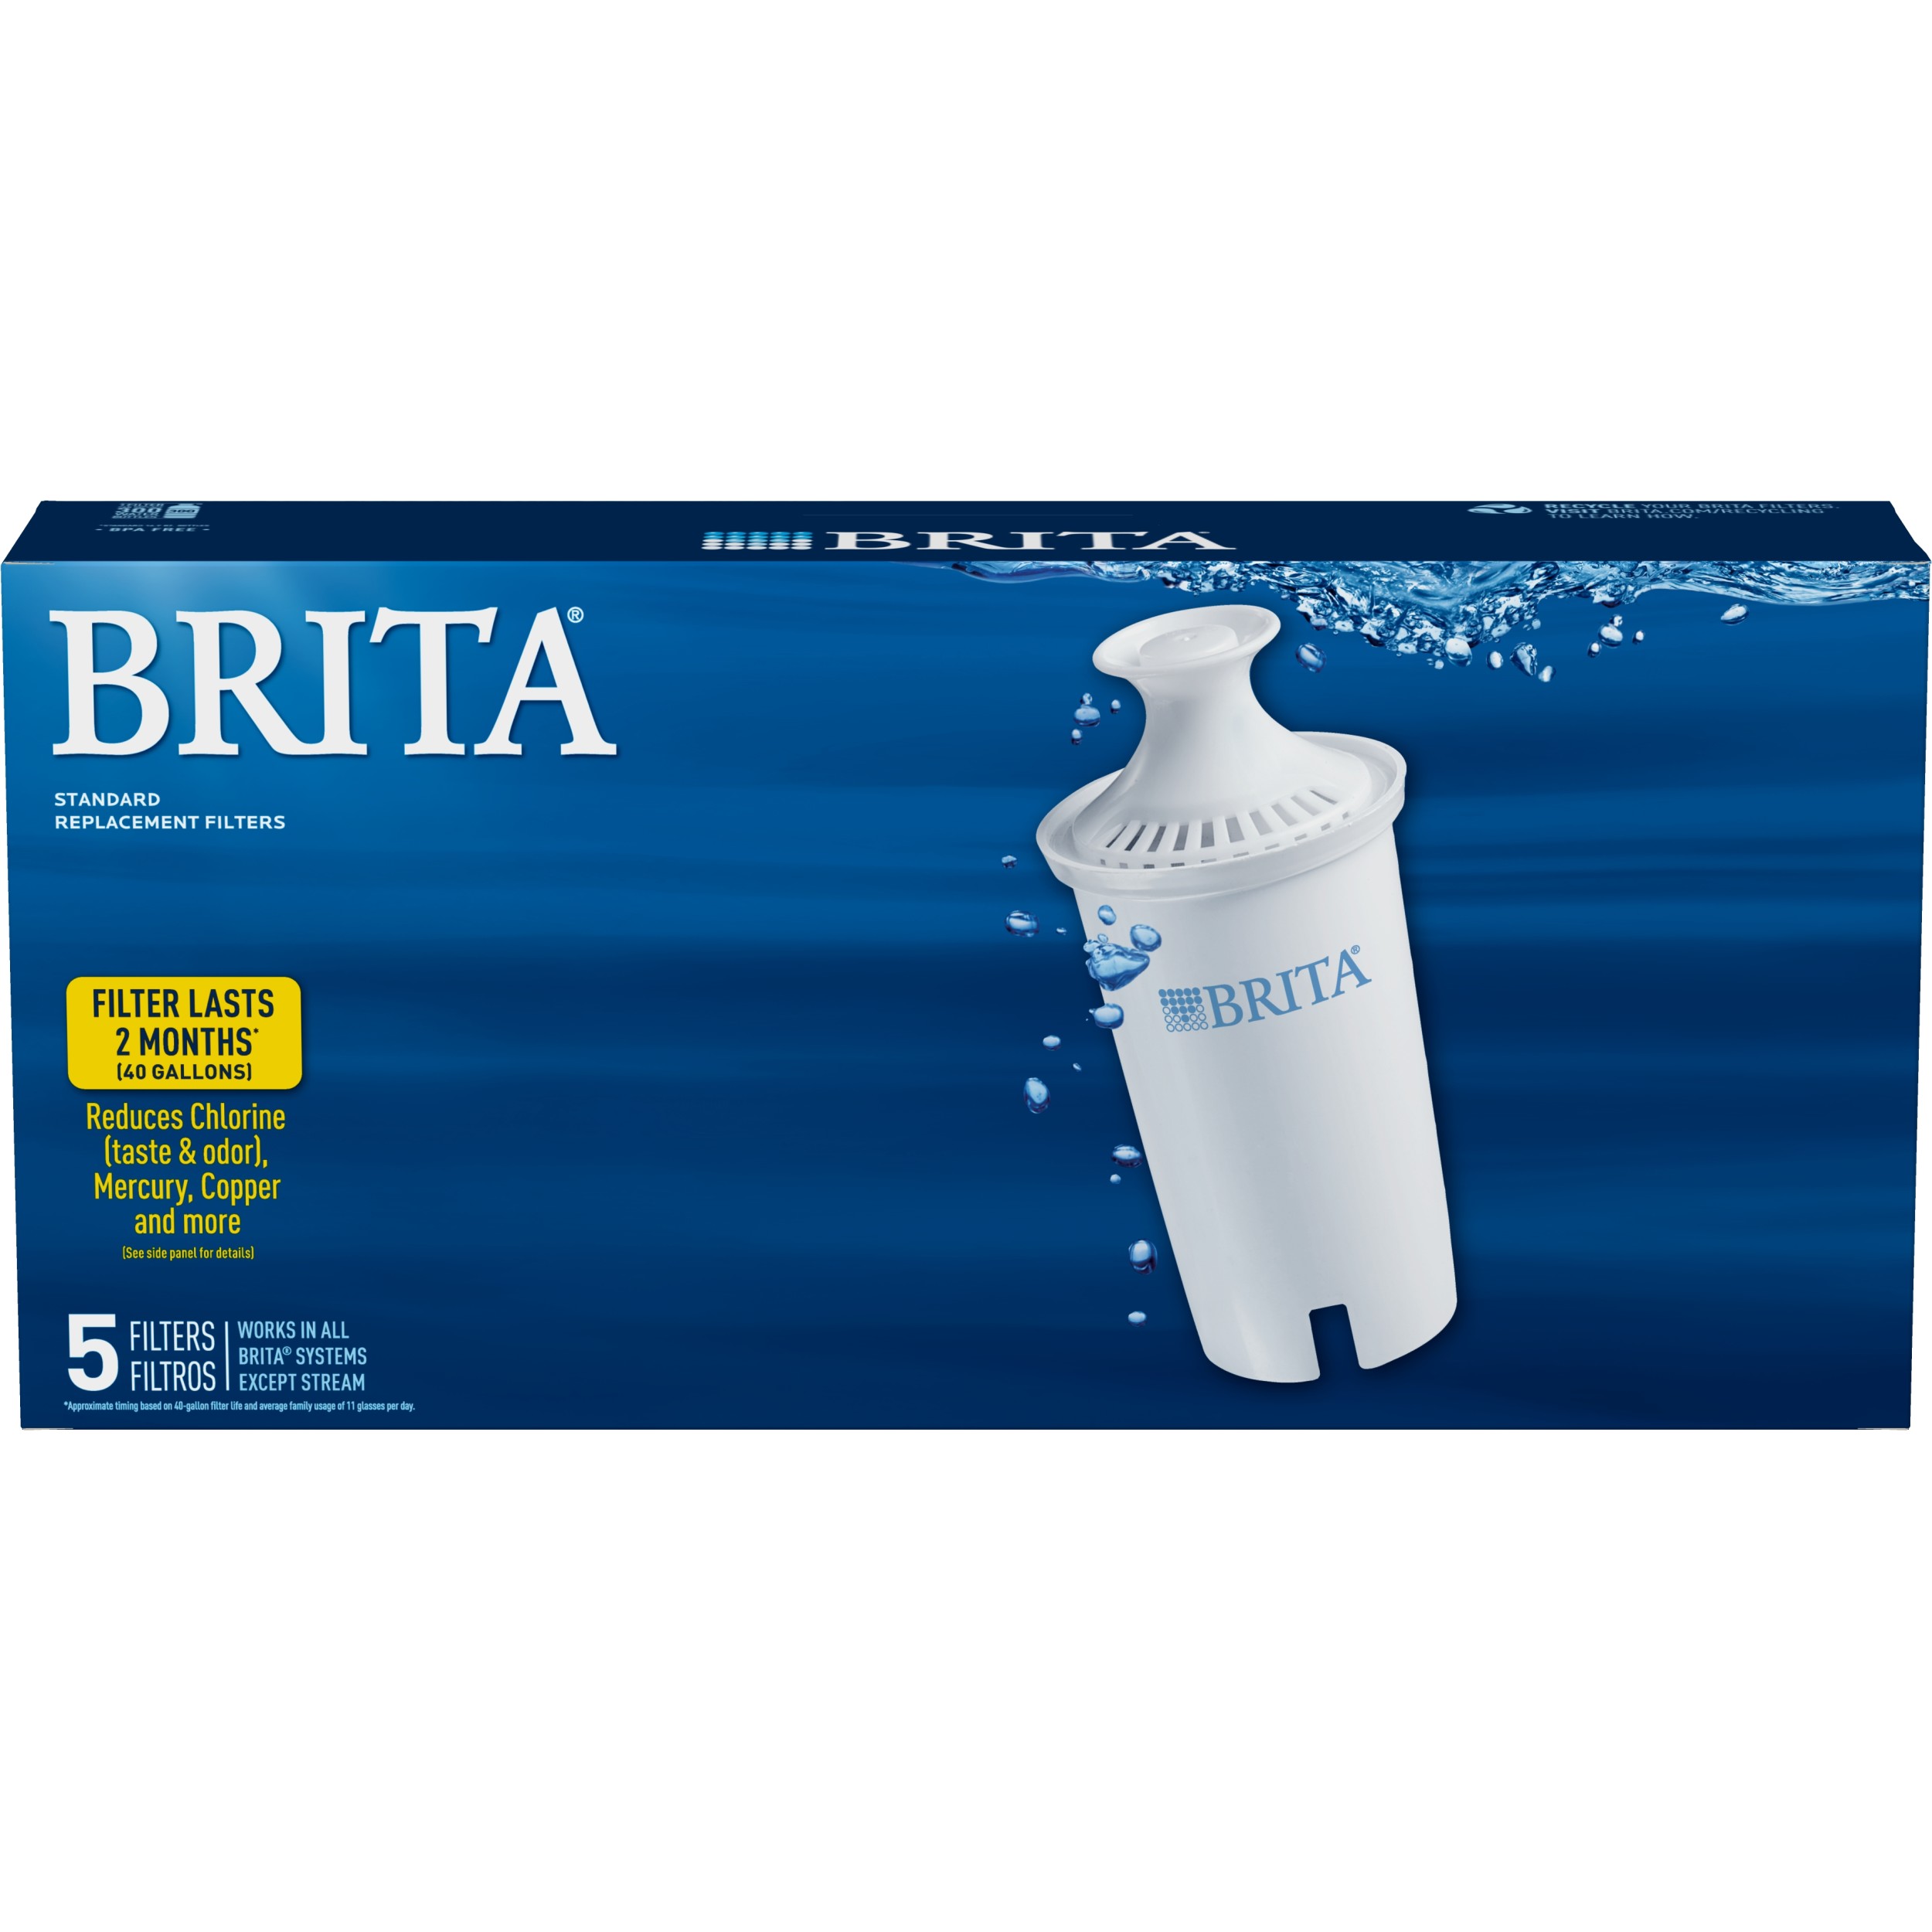 Brita Standard Water Filter Replacements, BPA Free, 5 Count - image 5 of 7